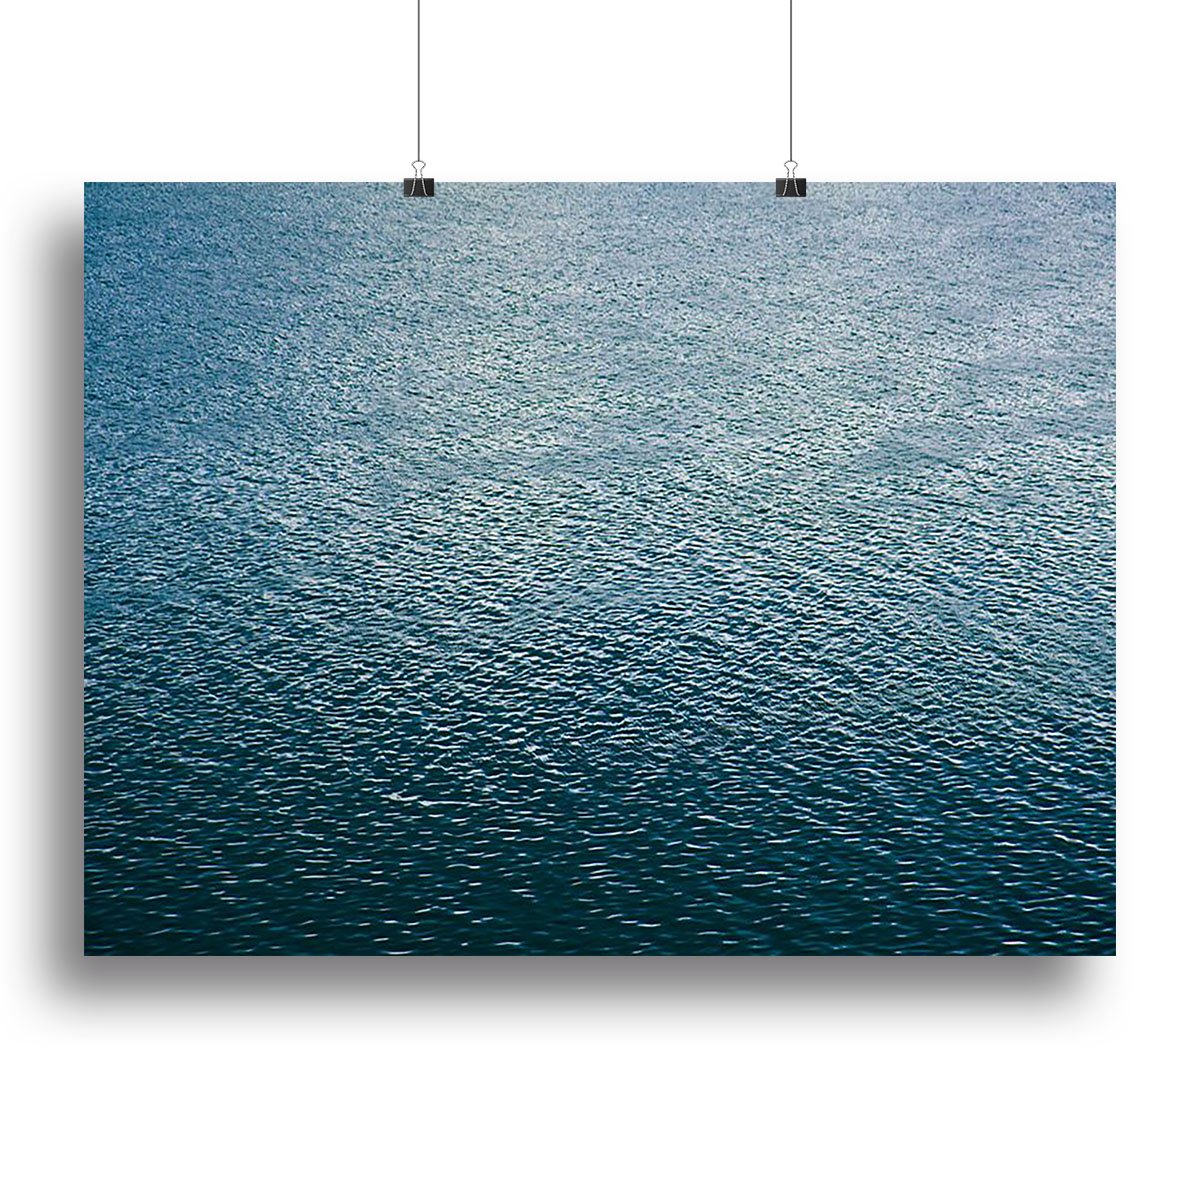 Ripple on blue water Canvas Print or Poster